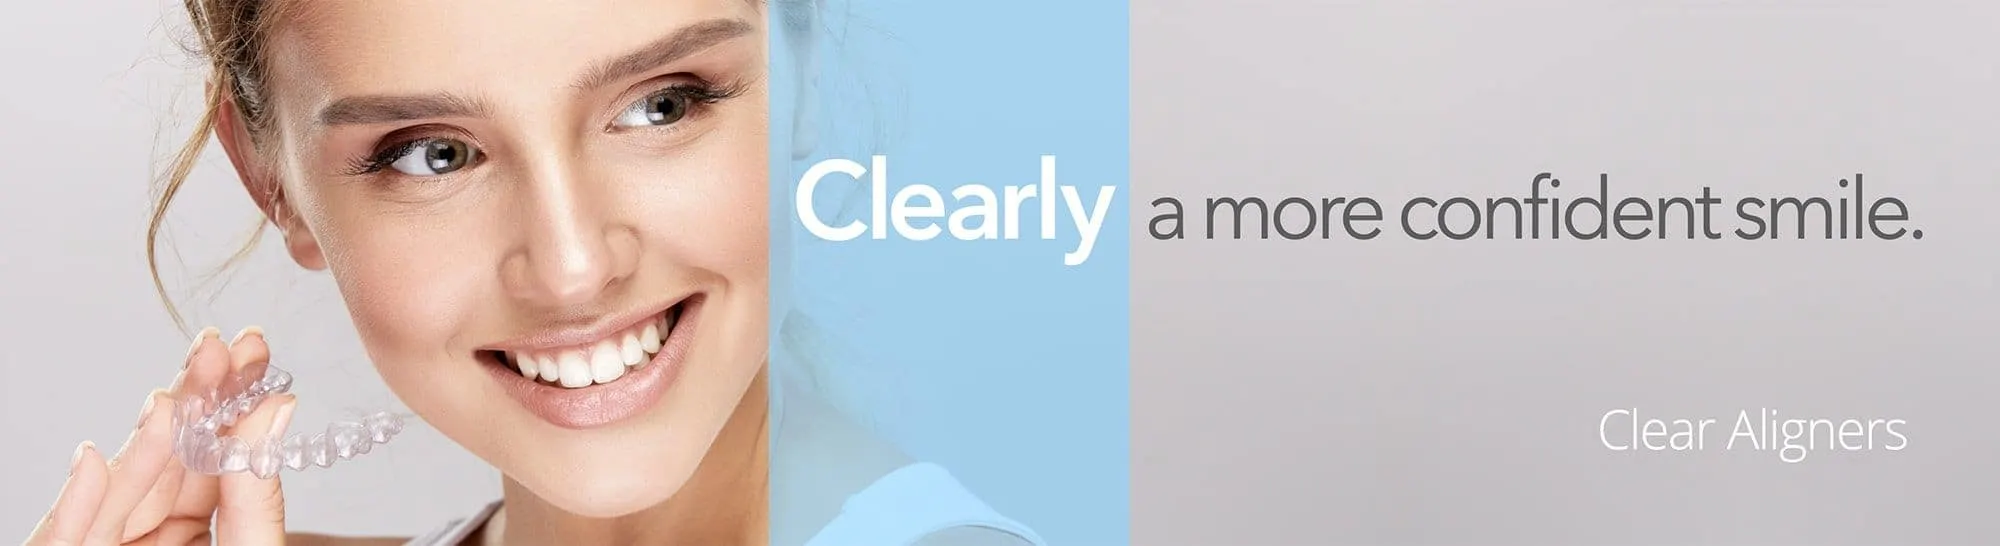 woman holding clear aligners